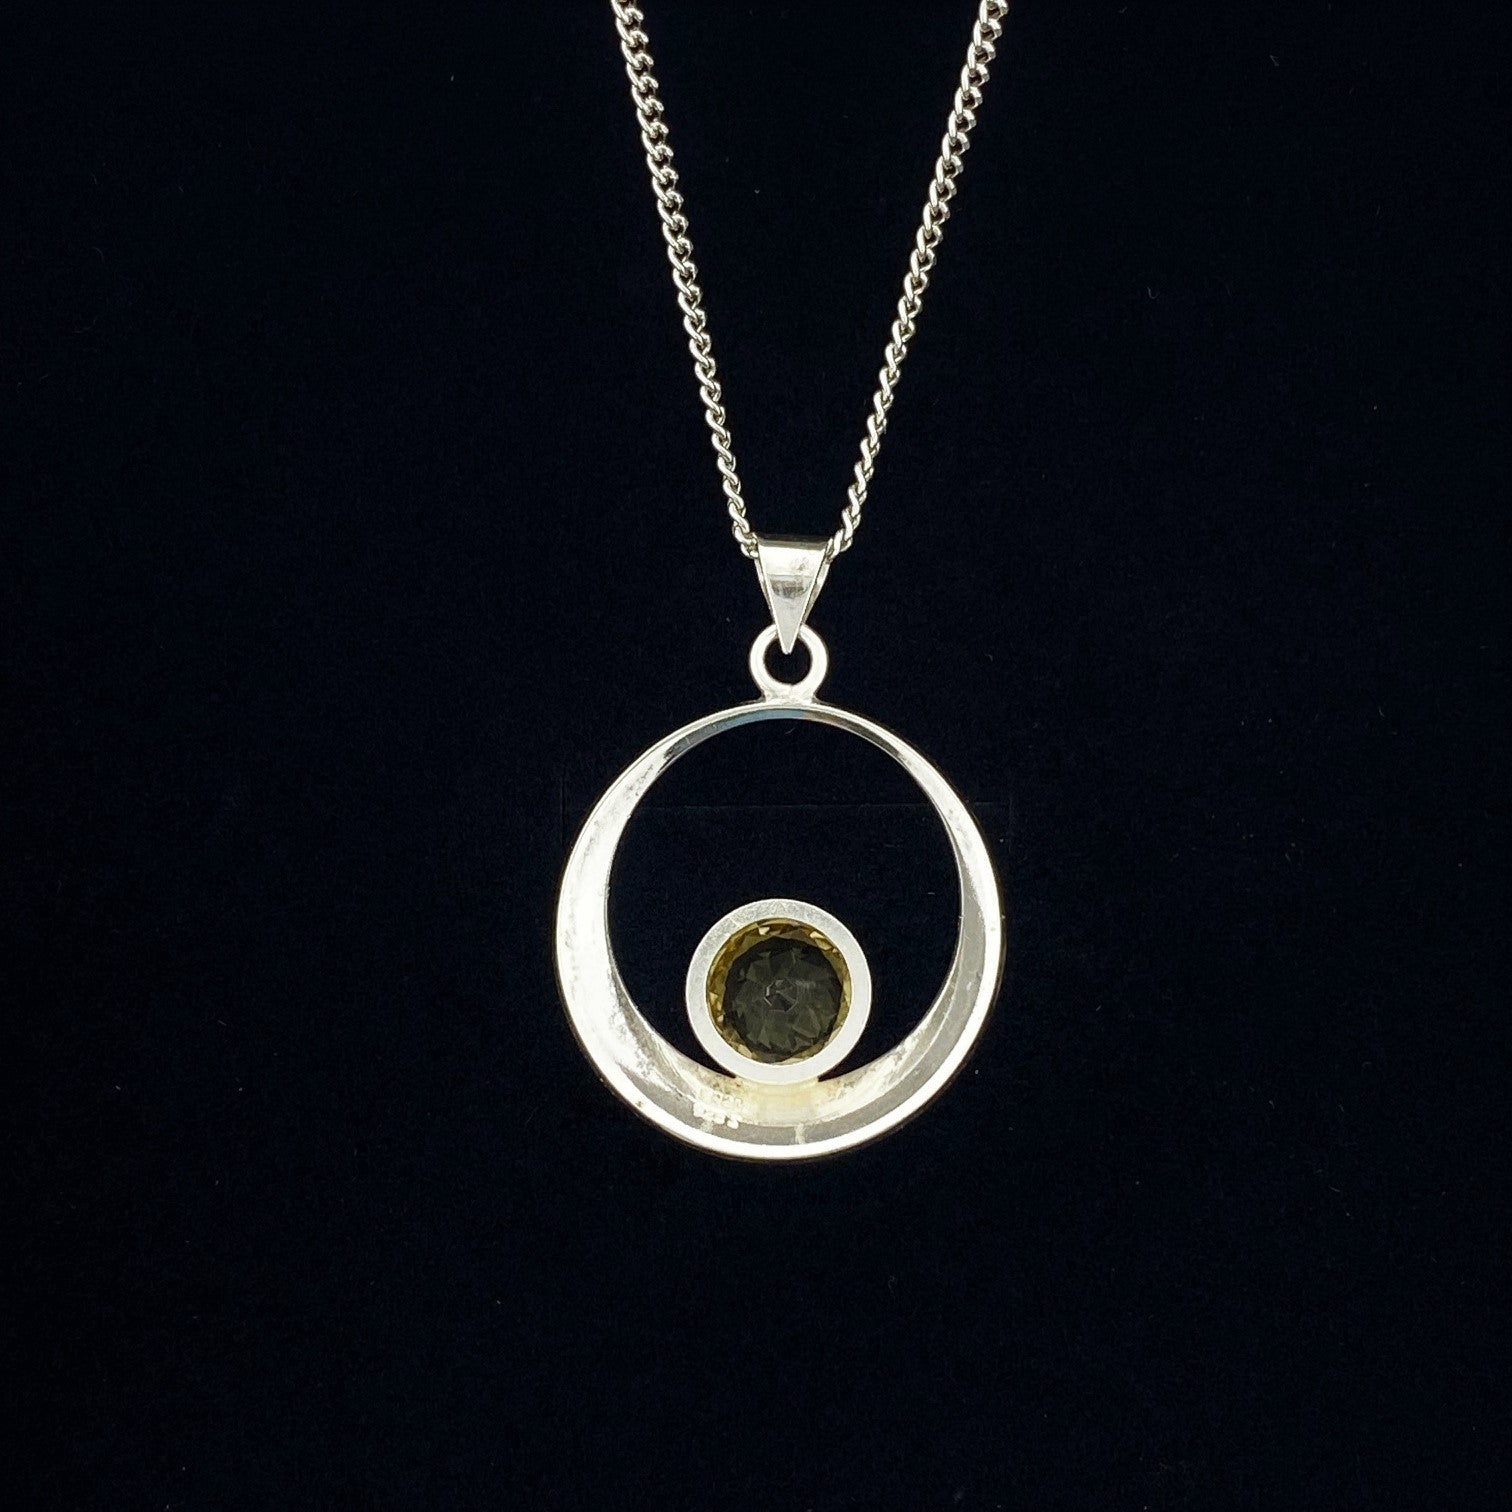 Silver pendant with light beige stone and chain from NEFrom